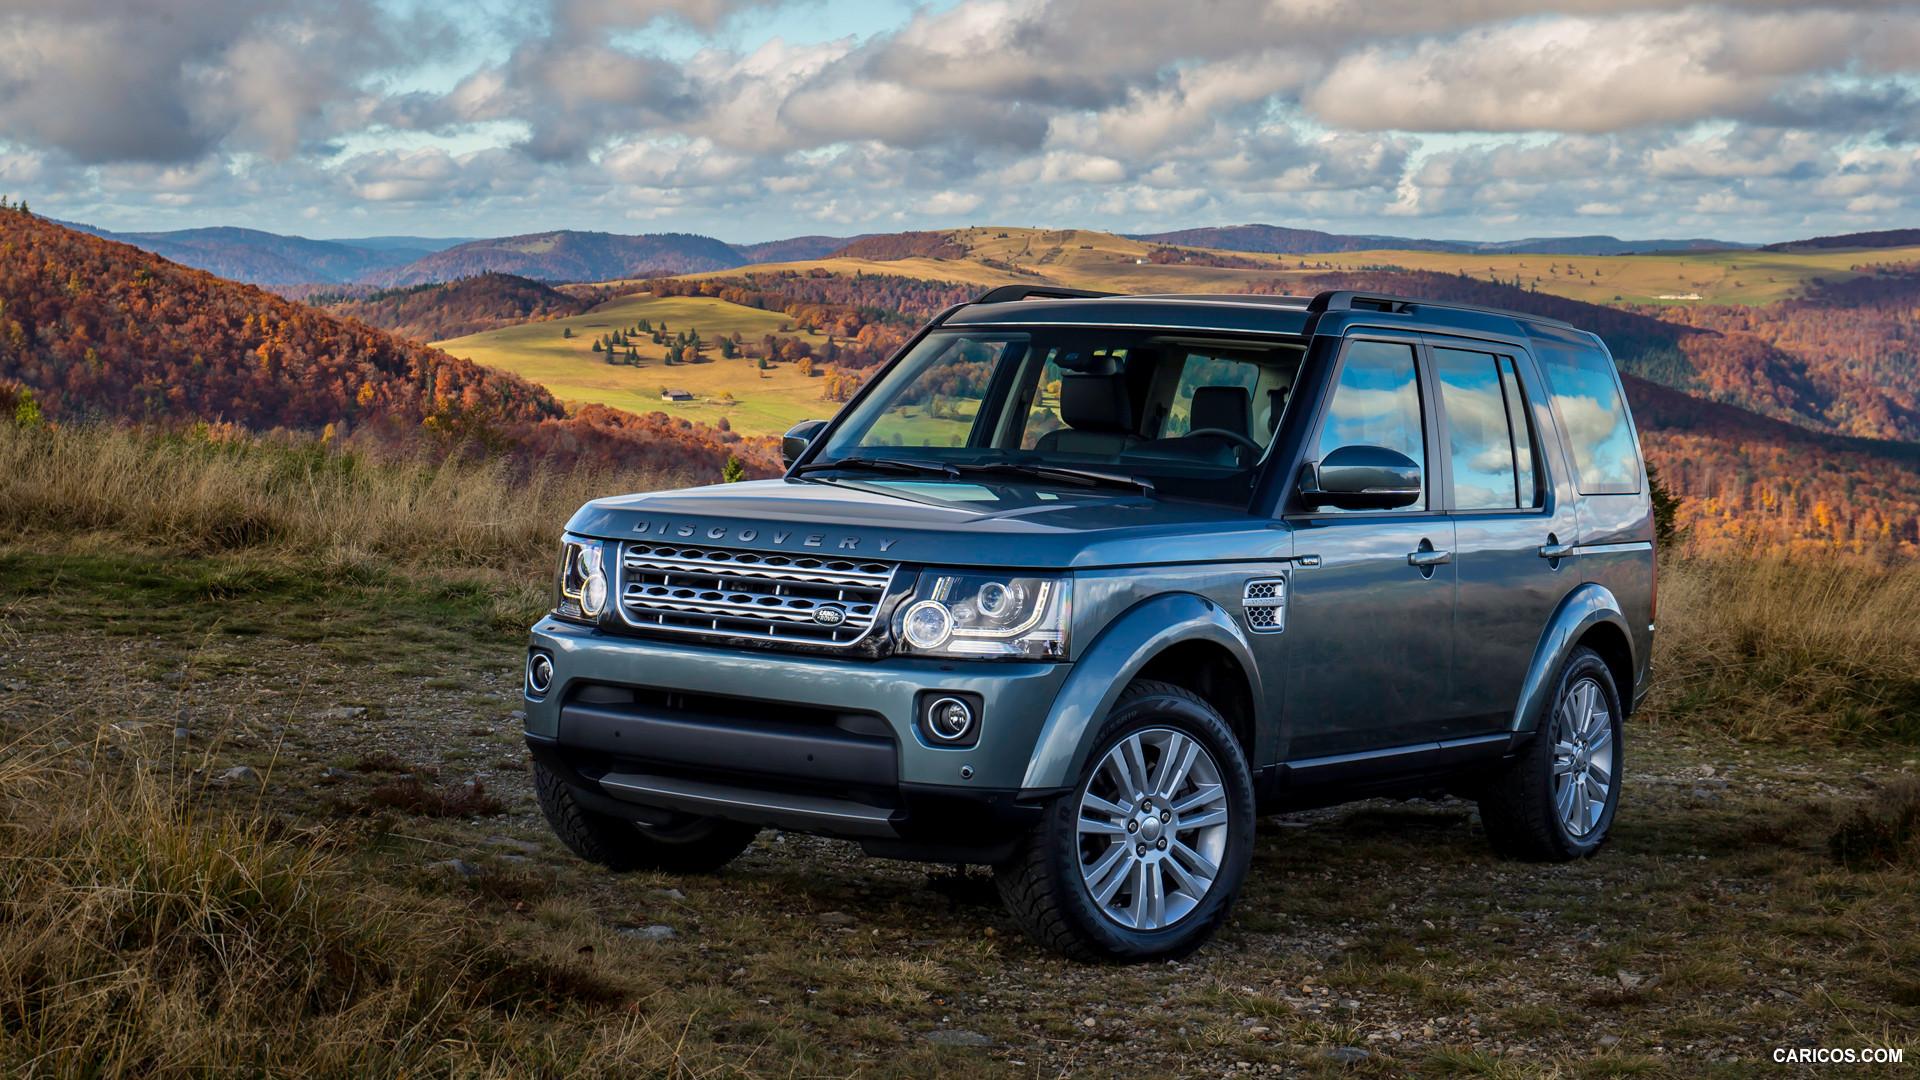 Land Rover Discovery Wallpapers - Wallpaper Cave
 2014 Land Rover Discovery Wallpaper